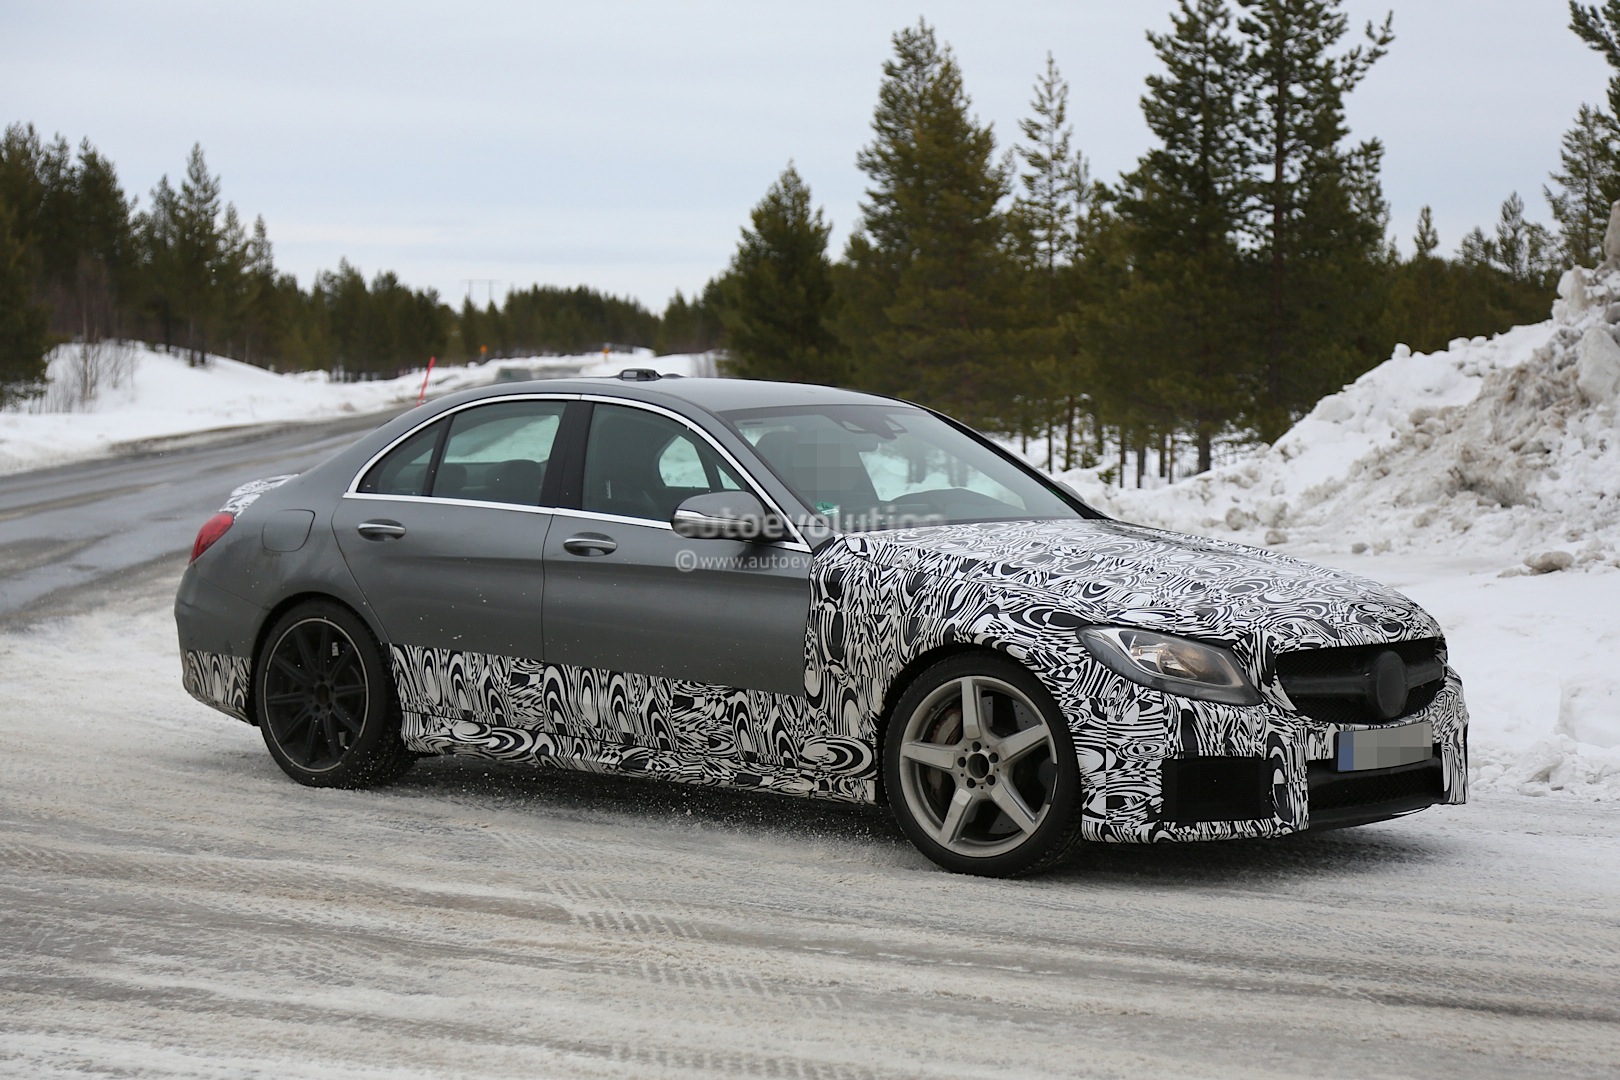 2014 - [Mercedes] Classe C [W205- S205] - Page 27 New-c-63-amg-w205-testing-with-old-c-63-amg-w204-photo-gallery_4